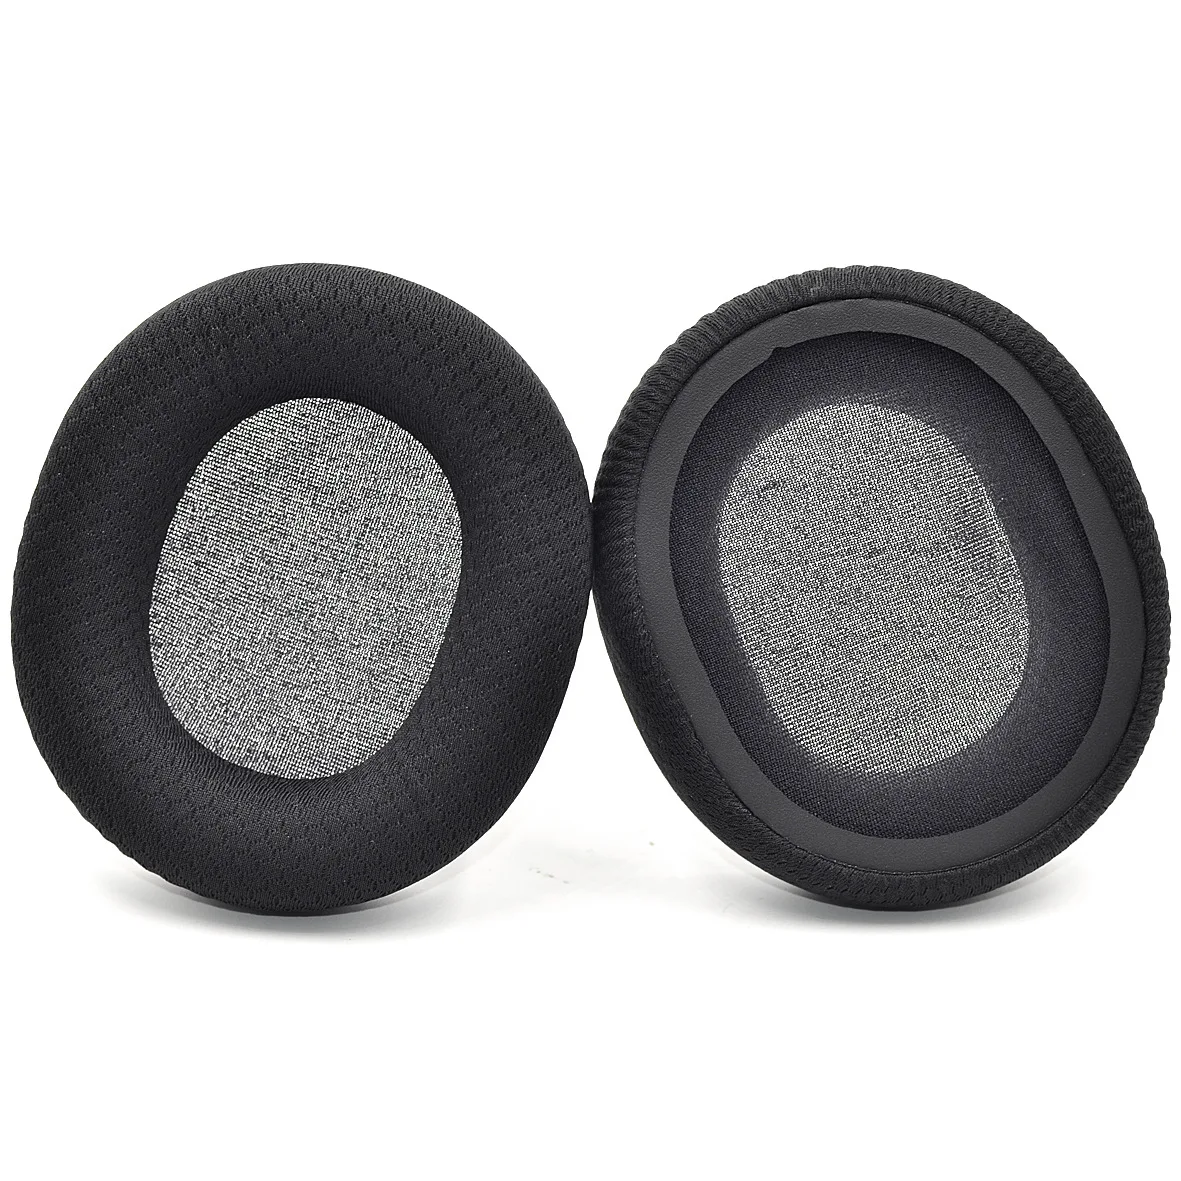 Suitable for steelseries Arctis 1/3/5/7/9/PRO ear pads Wireless Gaming Headset Cushion Cover sponge pad earmuffs Replacement images - 6